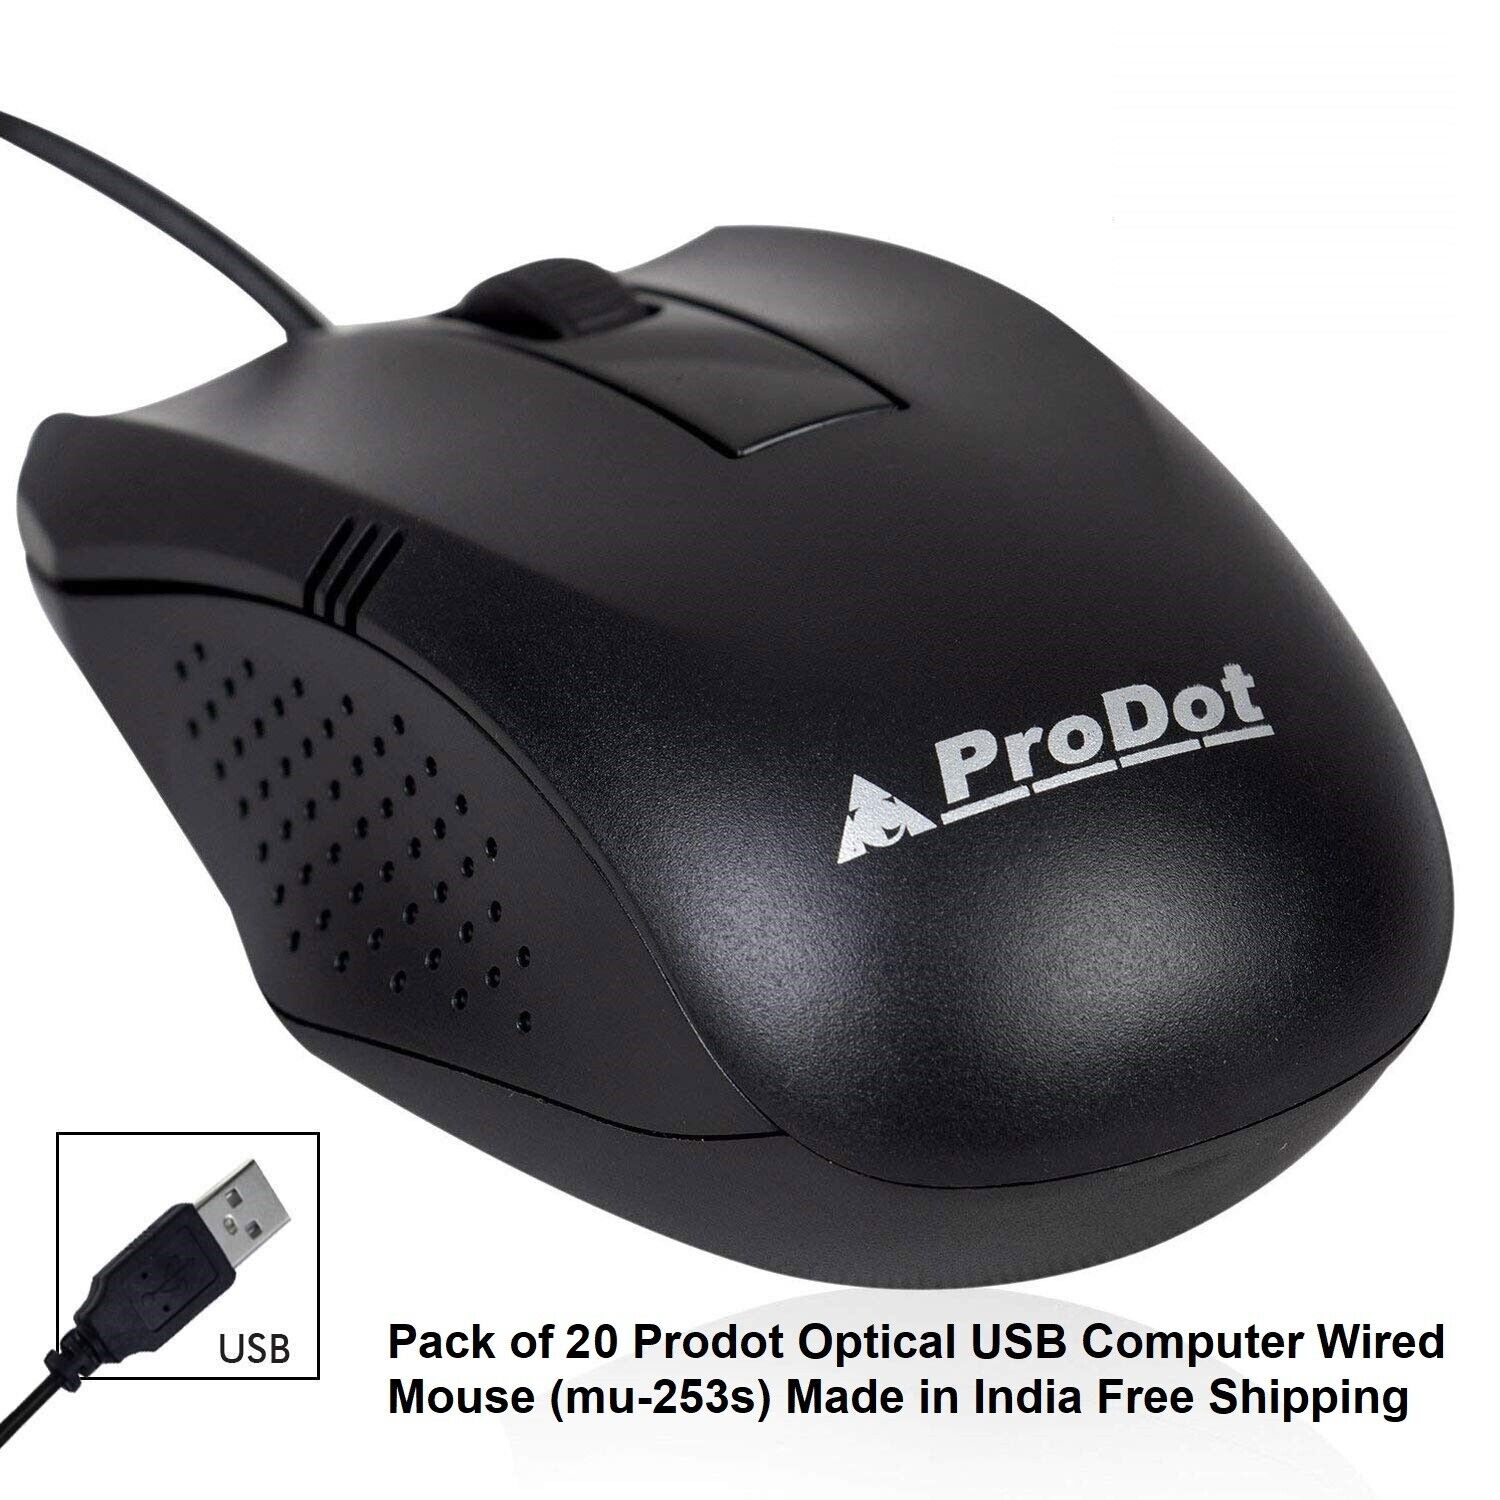 Pack of 20 Prodot Optical USB Computer Wired Mouse (mu-253s) Made in India 